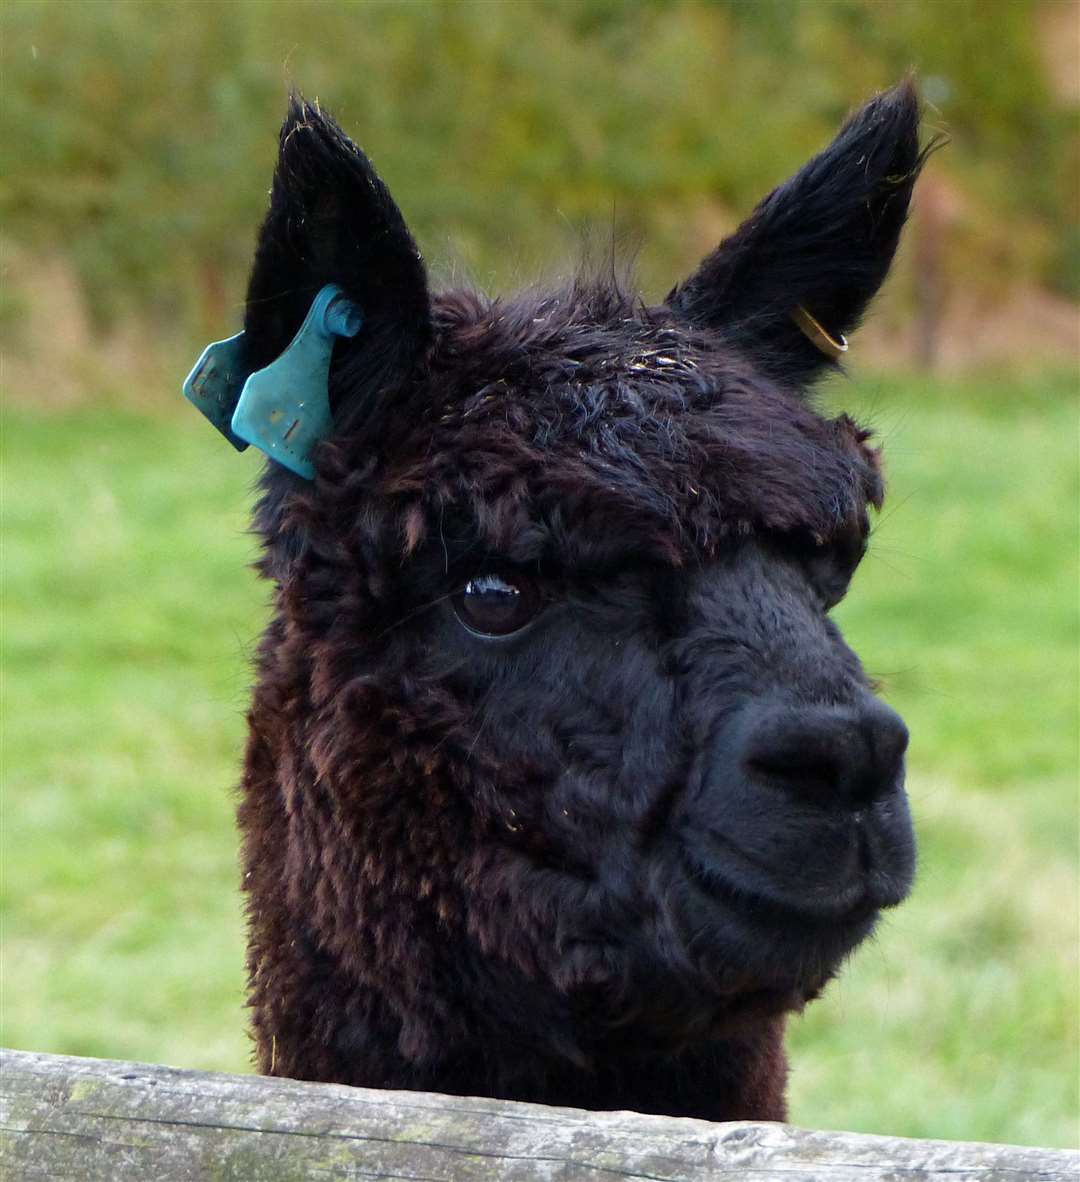 Geronimo is a six-year-old stud Alpaca imported from New Zealand (Helen Macdonald/PA)